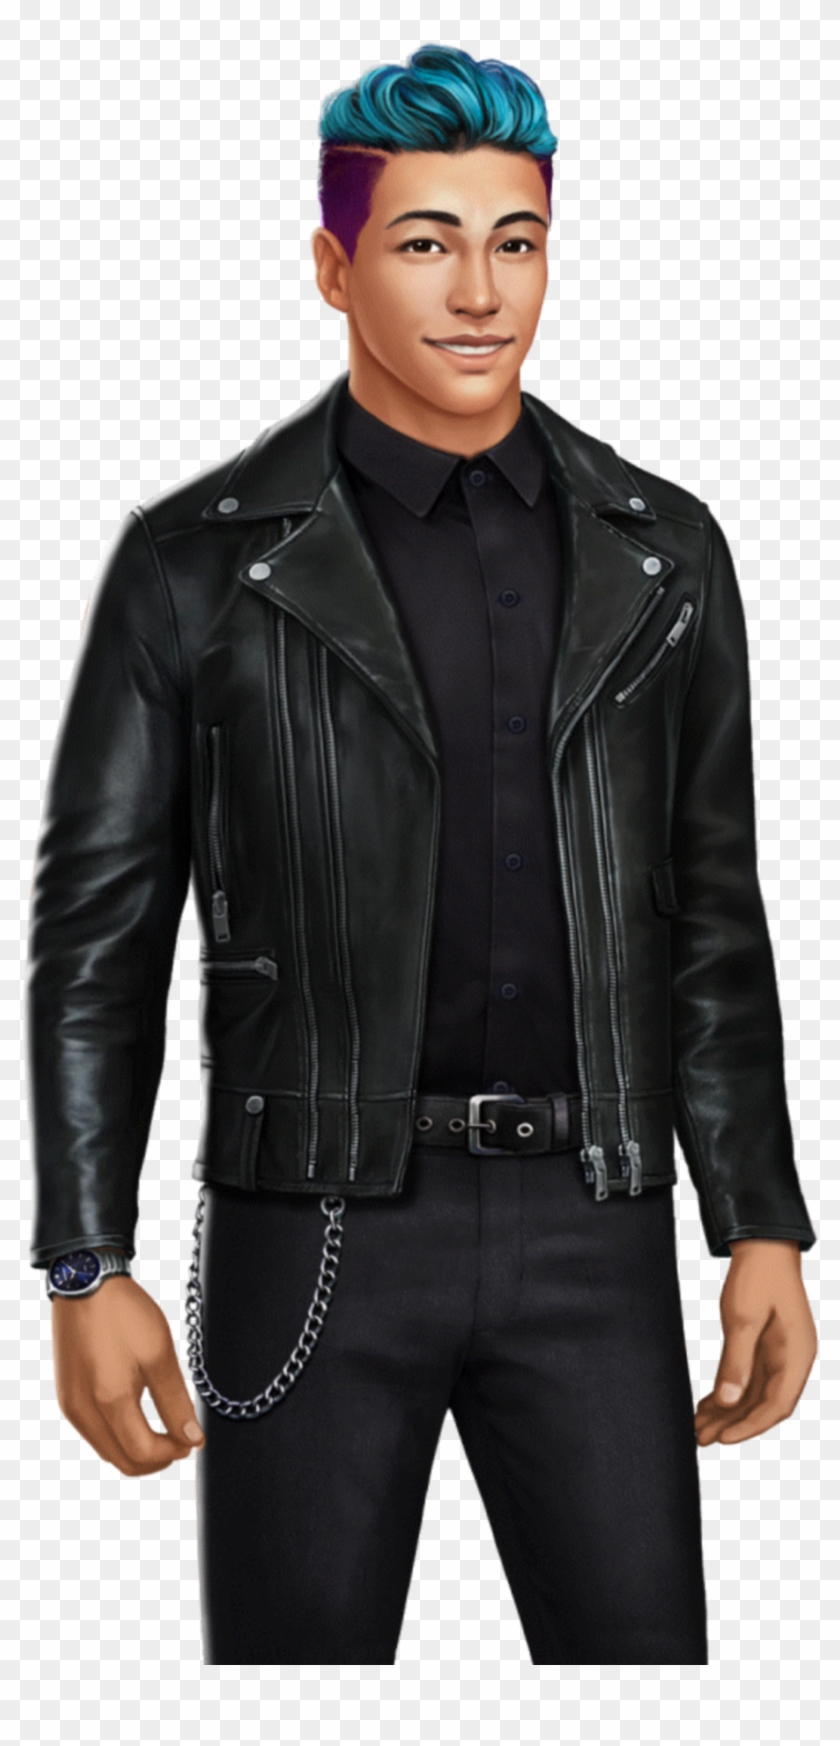 I Made 19 Children Last Night And I Don't Know What - Leather Jacket Clipart #4434983